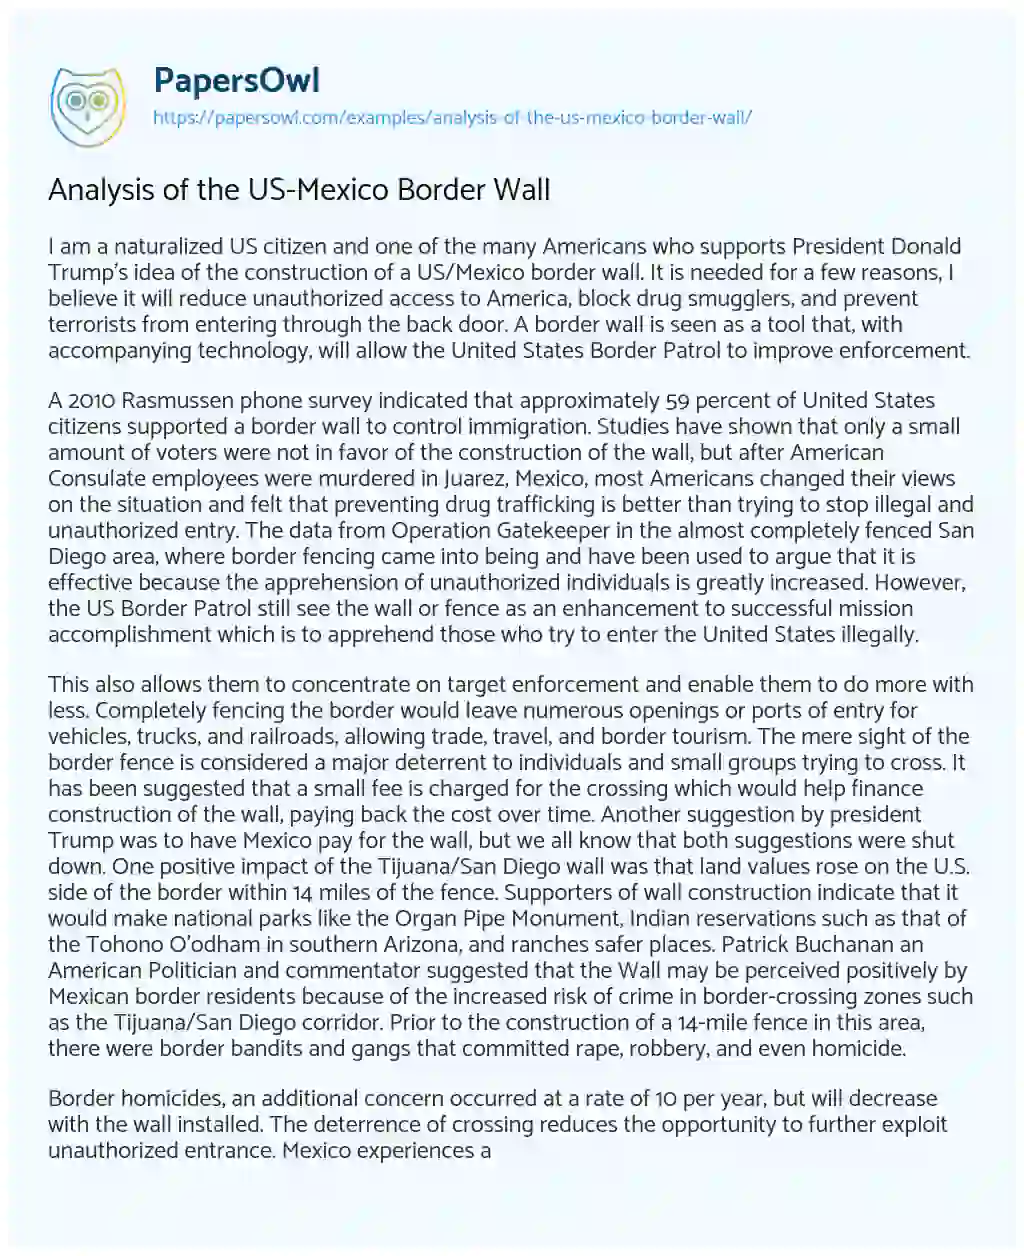 Essay on Analysis of the US-Mexico Border Wall